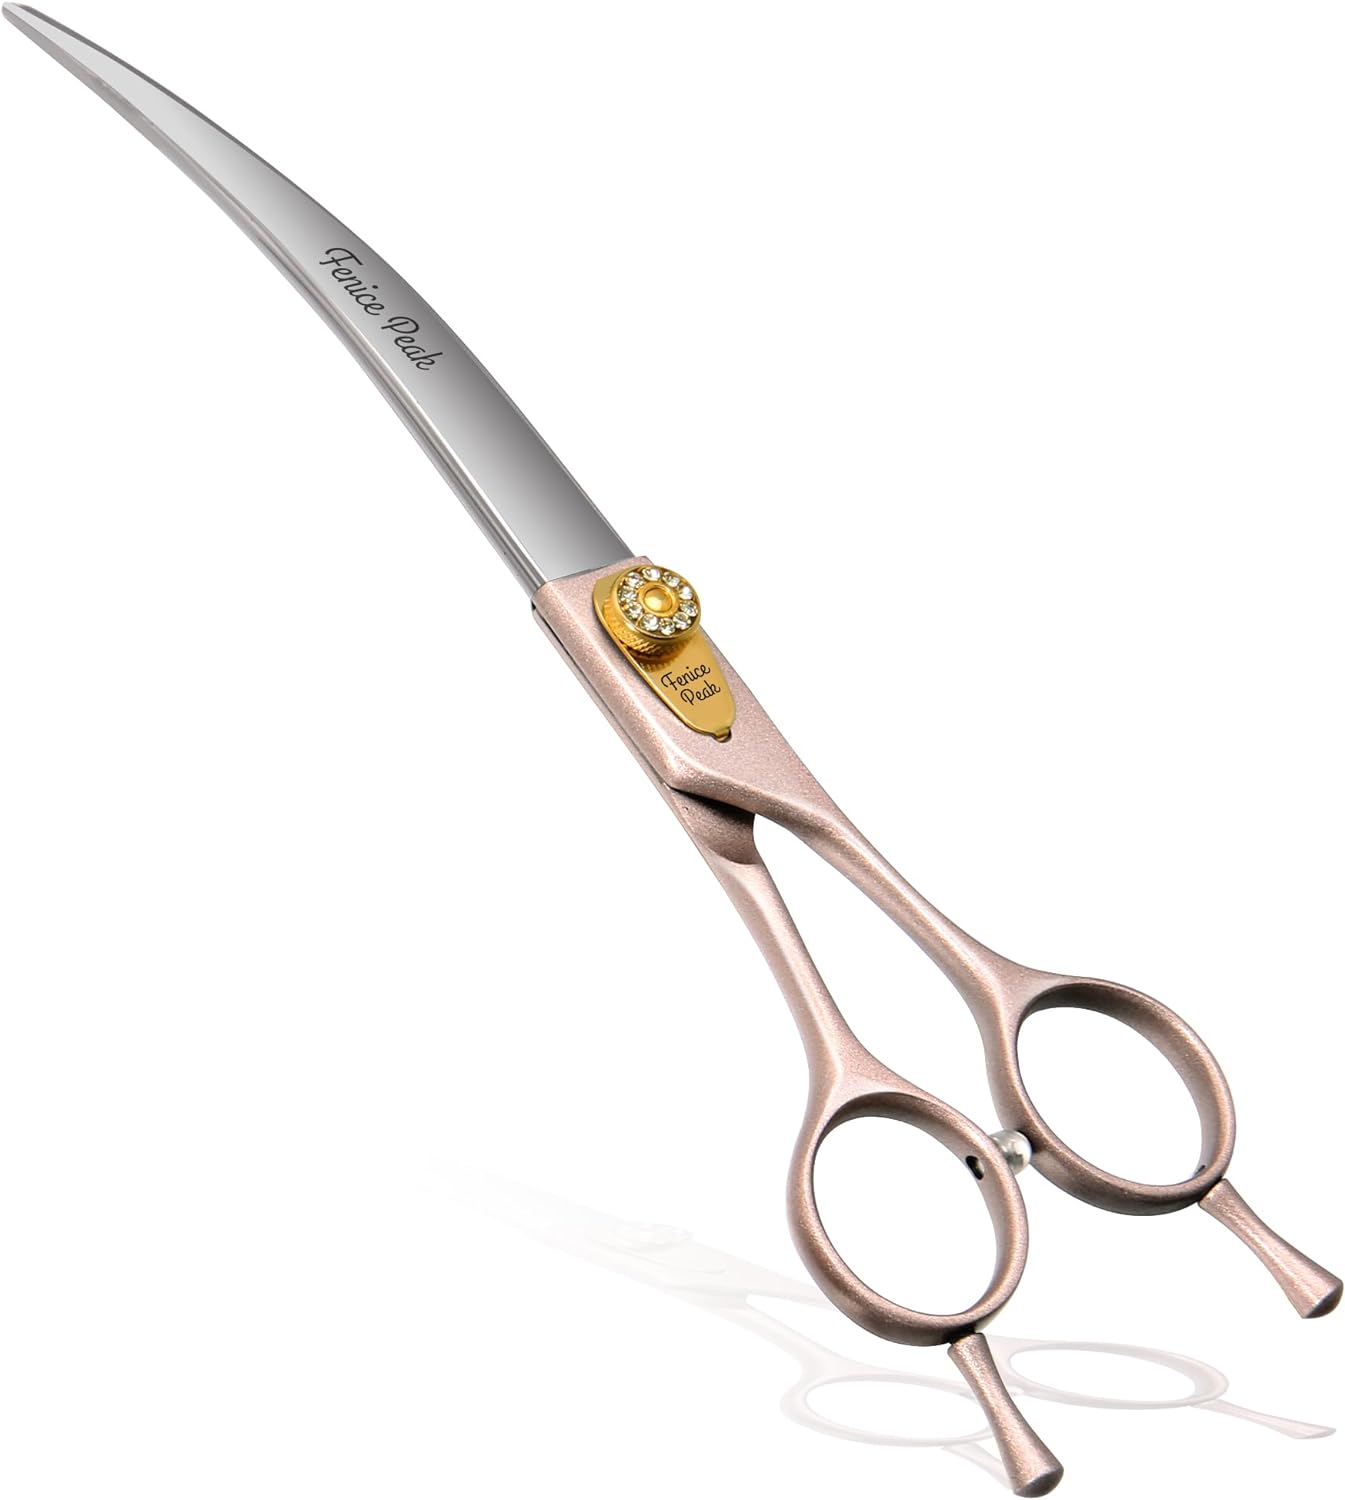 Fenice Peak Professional Curved Dog Grooming Scissors 7.5'' Rose Gold 440C Stainless Steel Pet Cutting Shears Safety Trimming Shearing for Dogs Cats